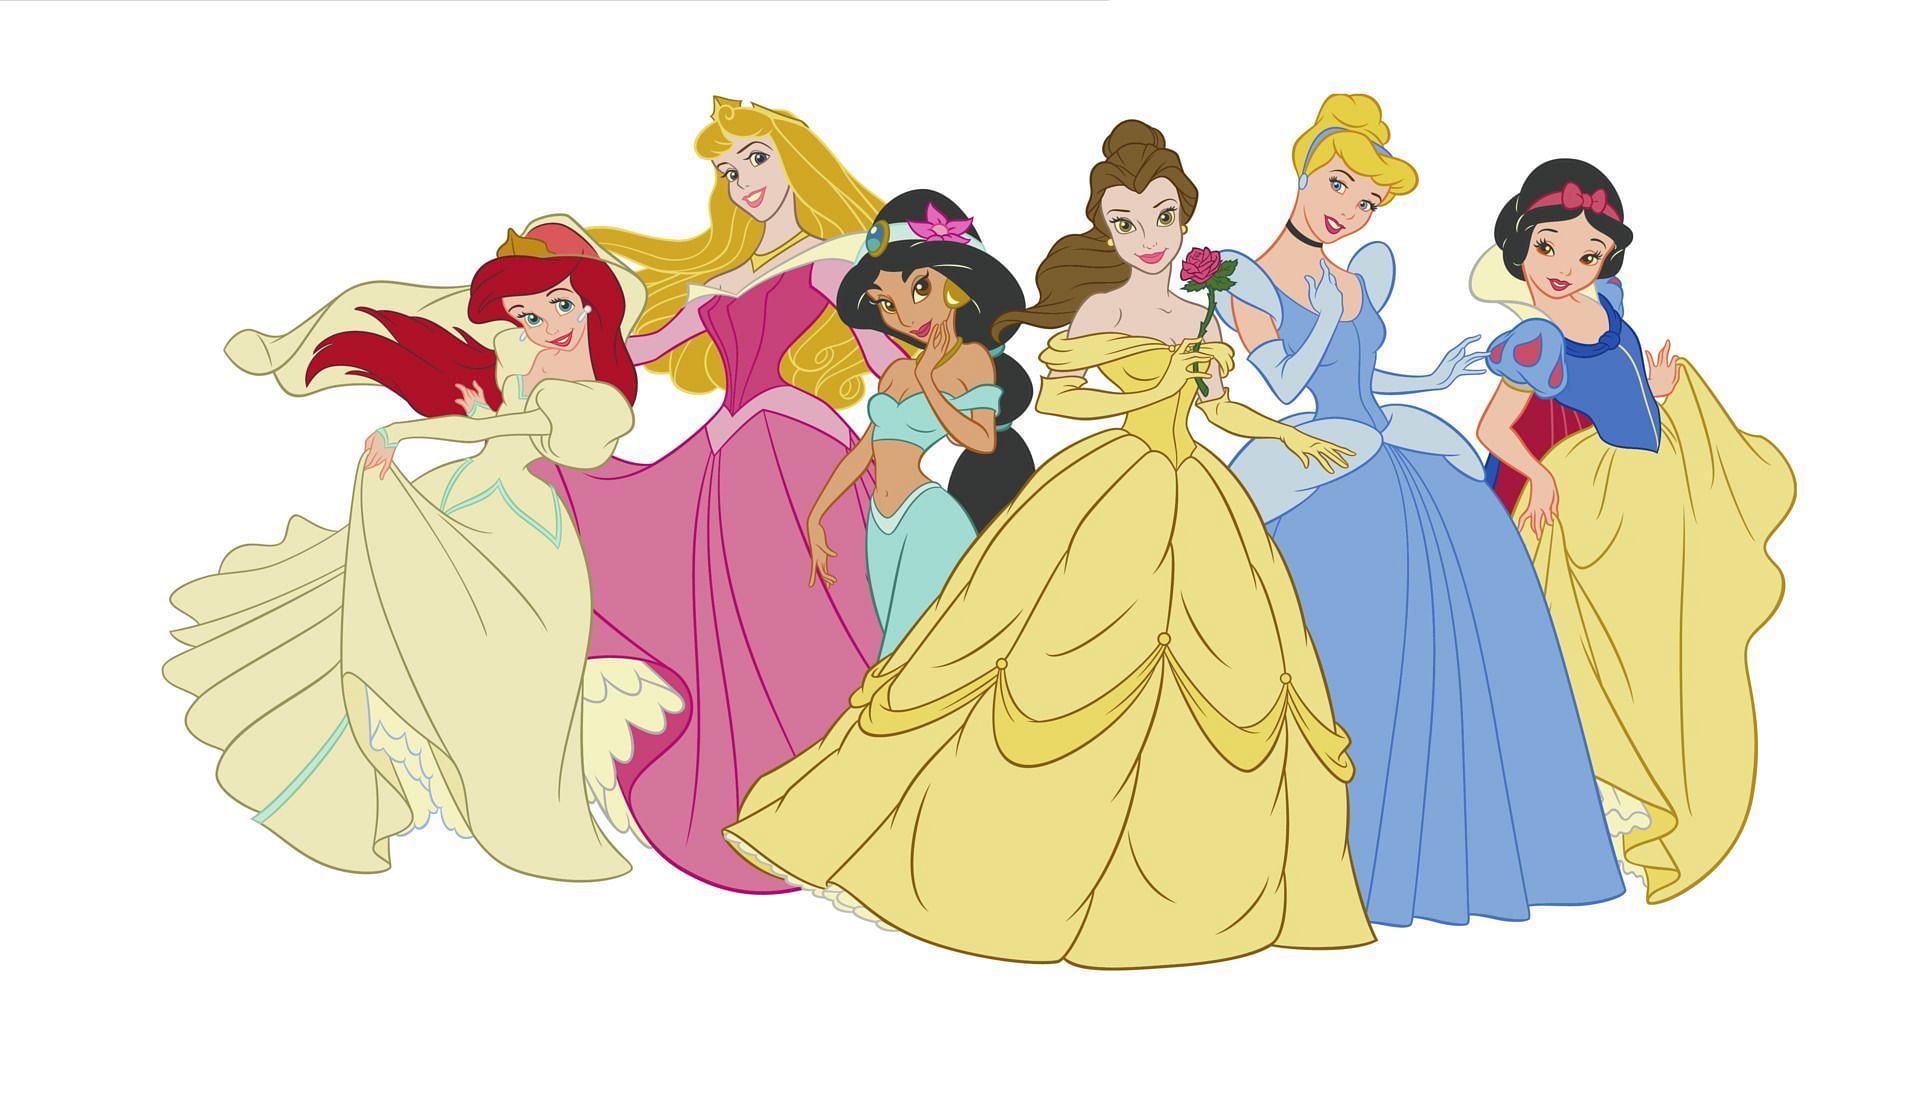 The world of disney princess mental disorders is yet to be explored and identified. (Image via Vecteezy/ Muza DS)